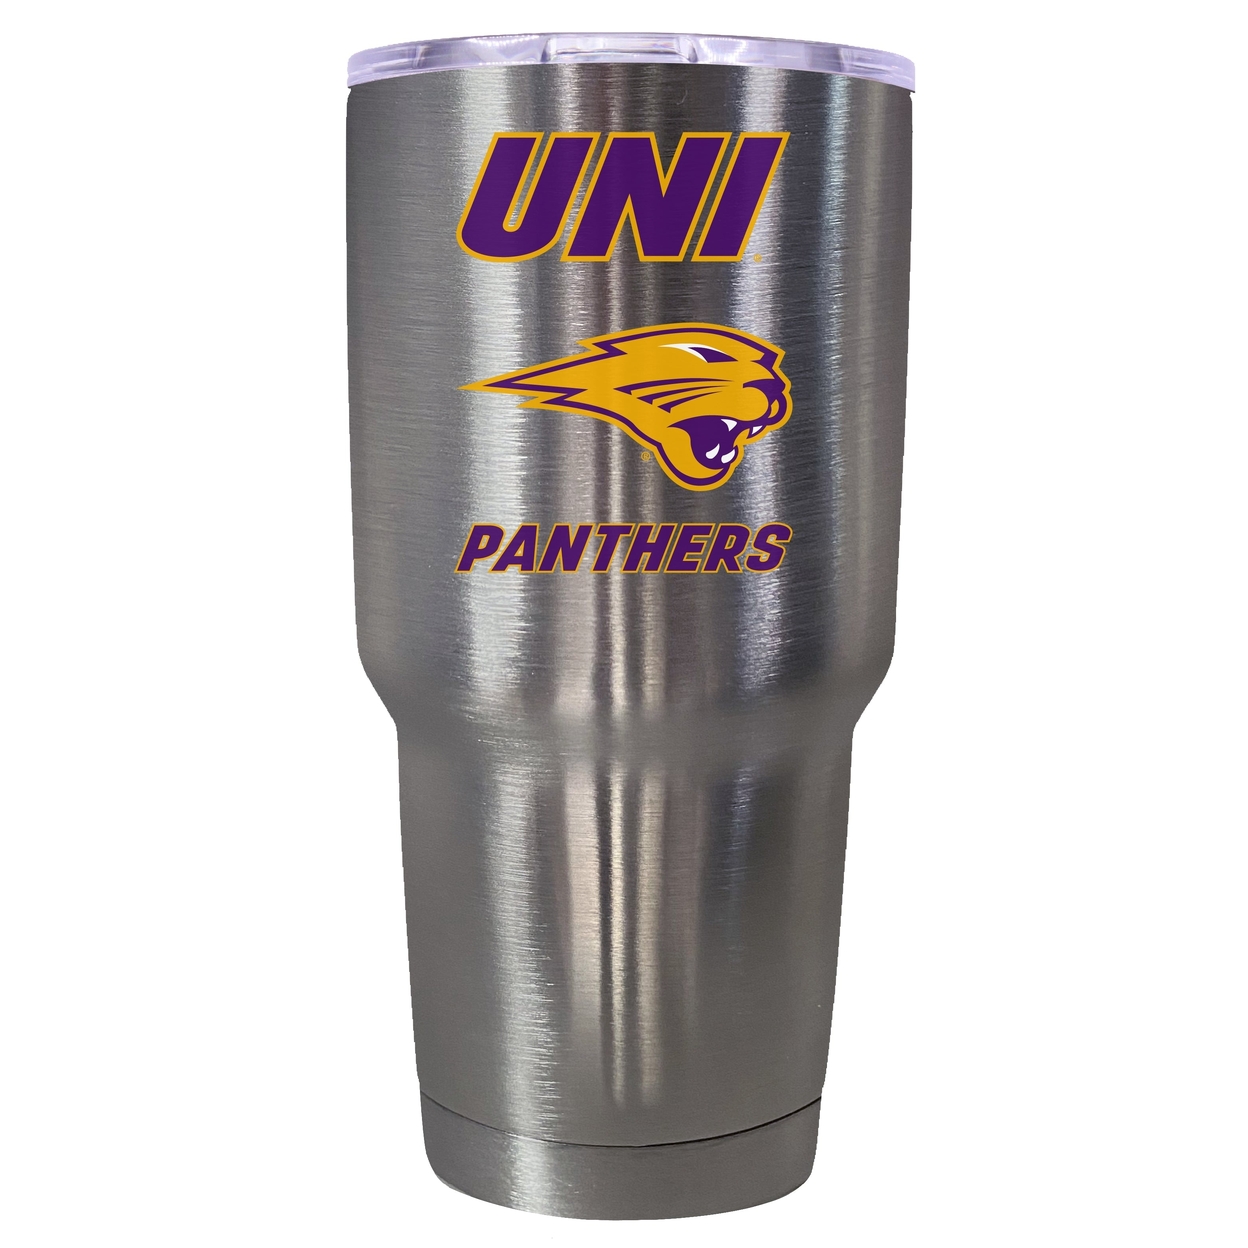 Northern Iowa Panthers 24 Oz Insulated Stainless Steel Tumbler